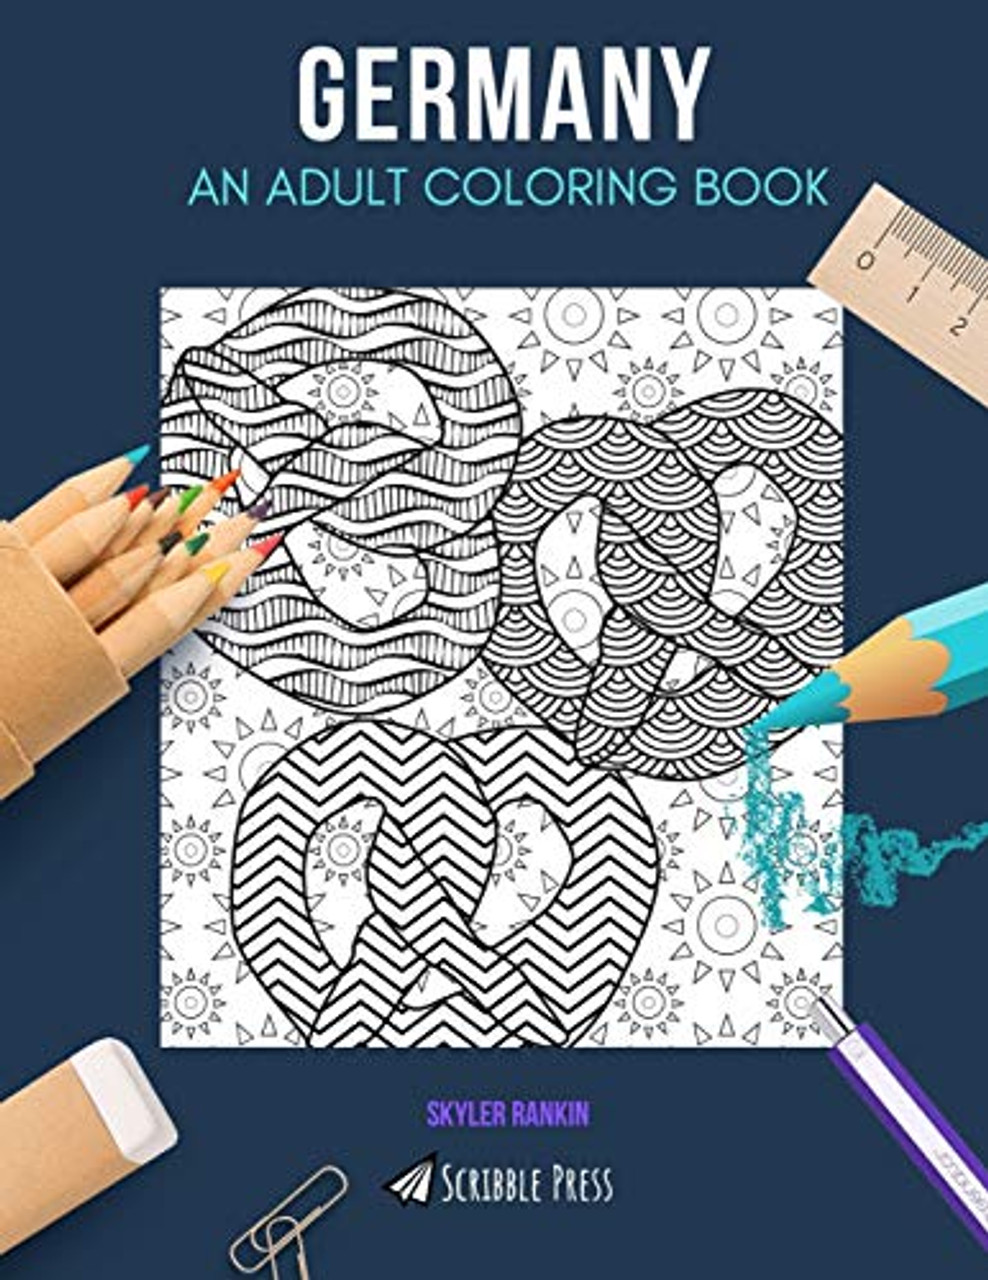 Mindfulness Coloring Book For Adults: Zen Coloring Book For Mindful People Adult  Coloring Book With Stress Relieving Designs Animals, Mandalas,  AD  (Paperback)